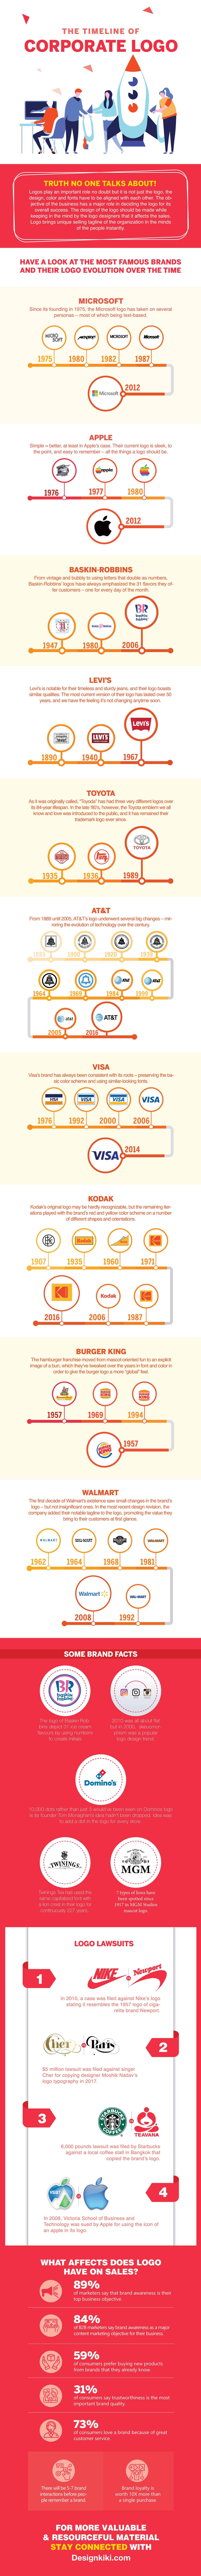 The timeline of corporate logo